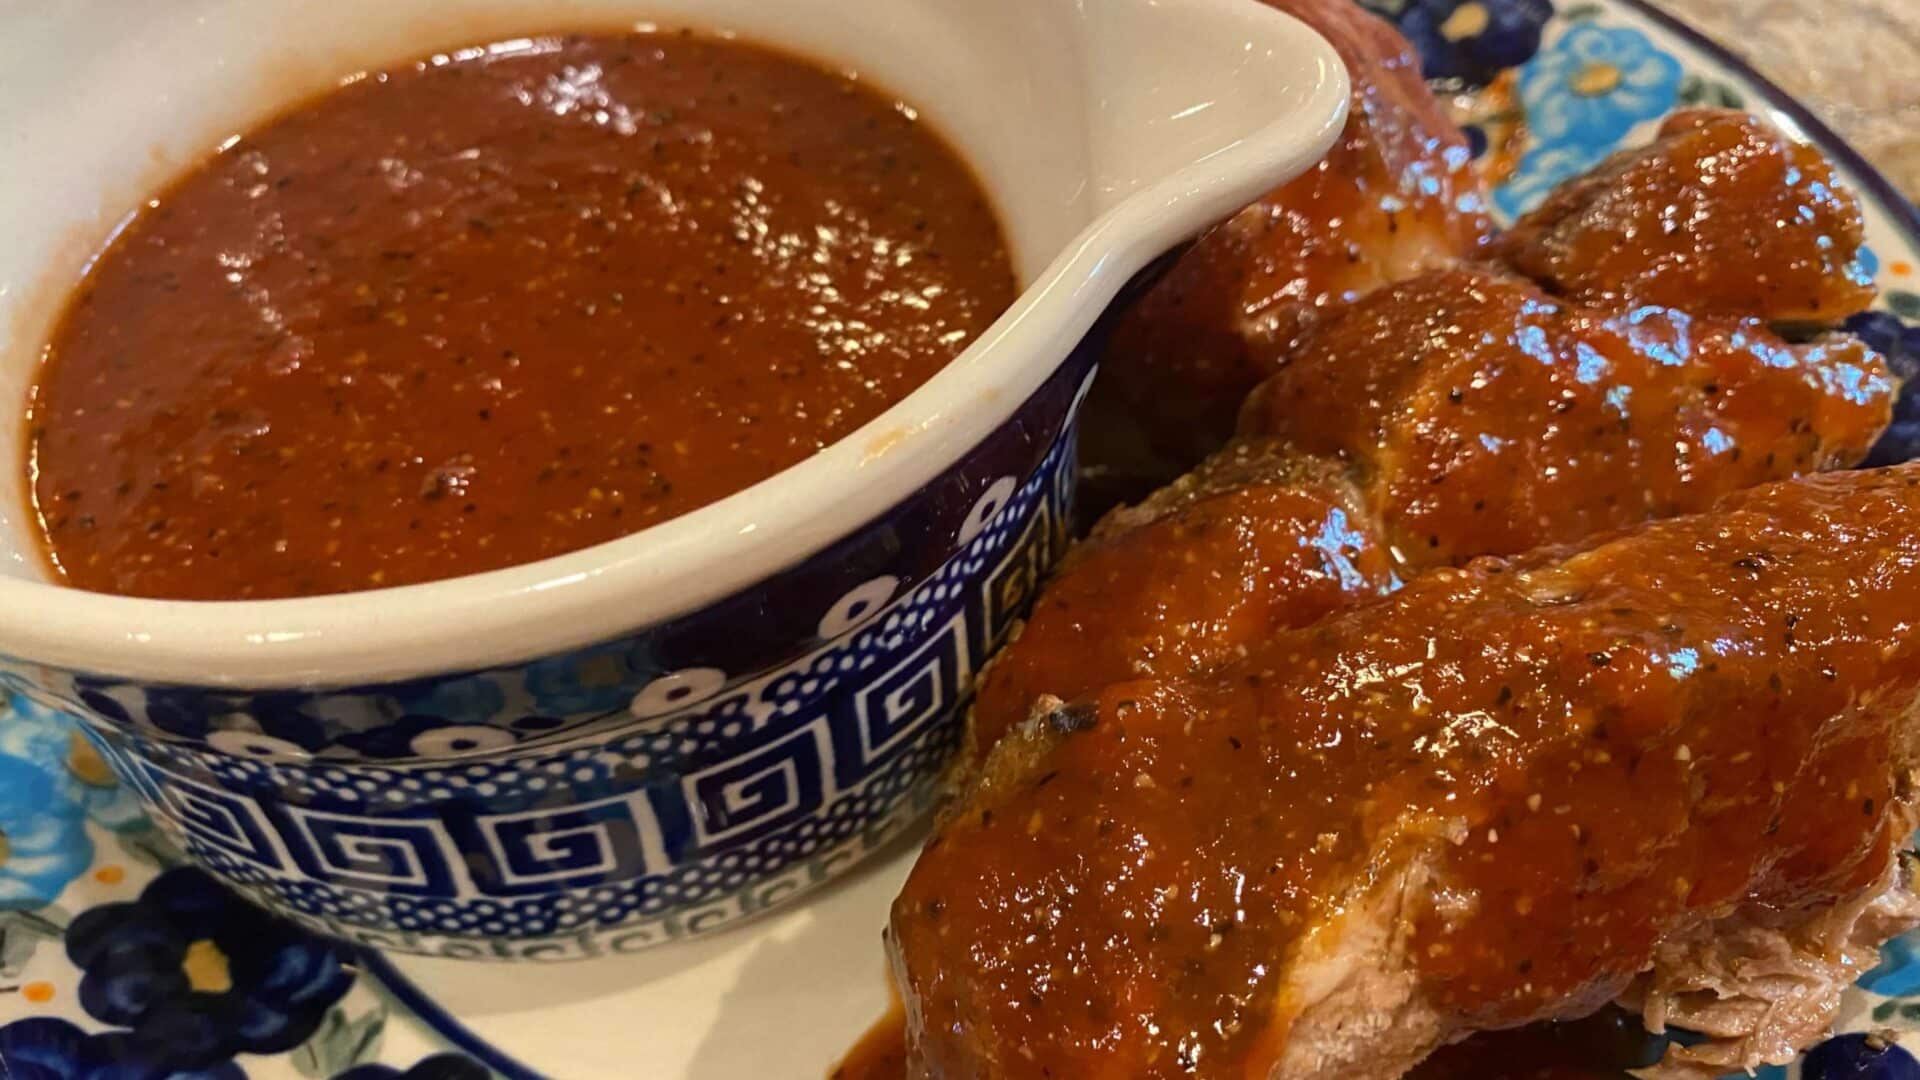 red sauce with specs of pepper and other spices on ribs, chicken and in a blue and white bowl